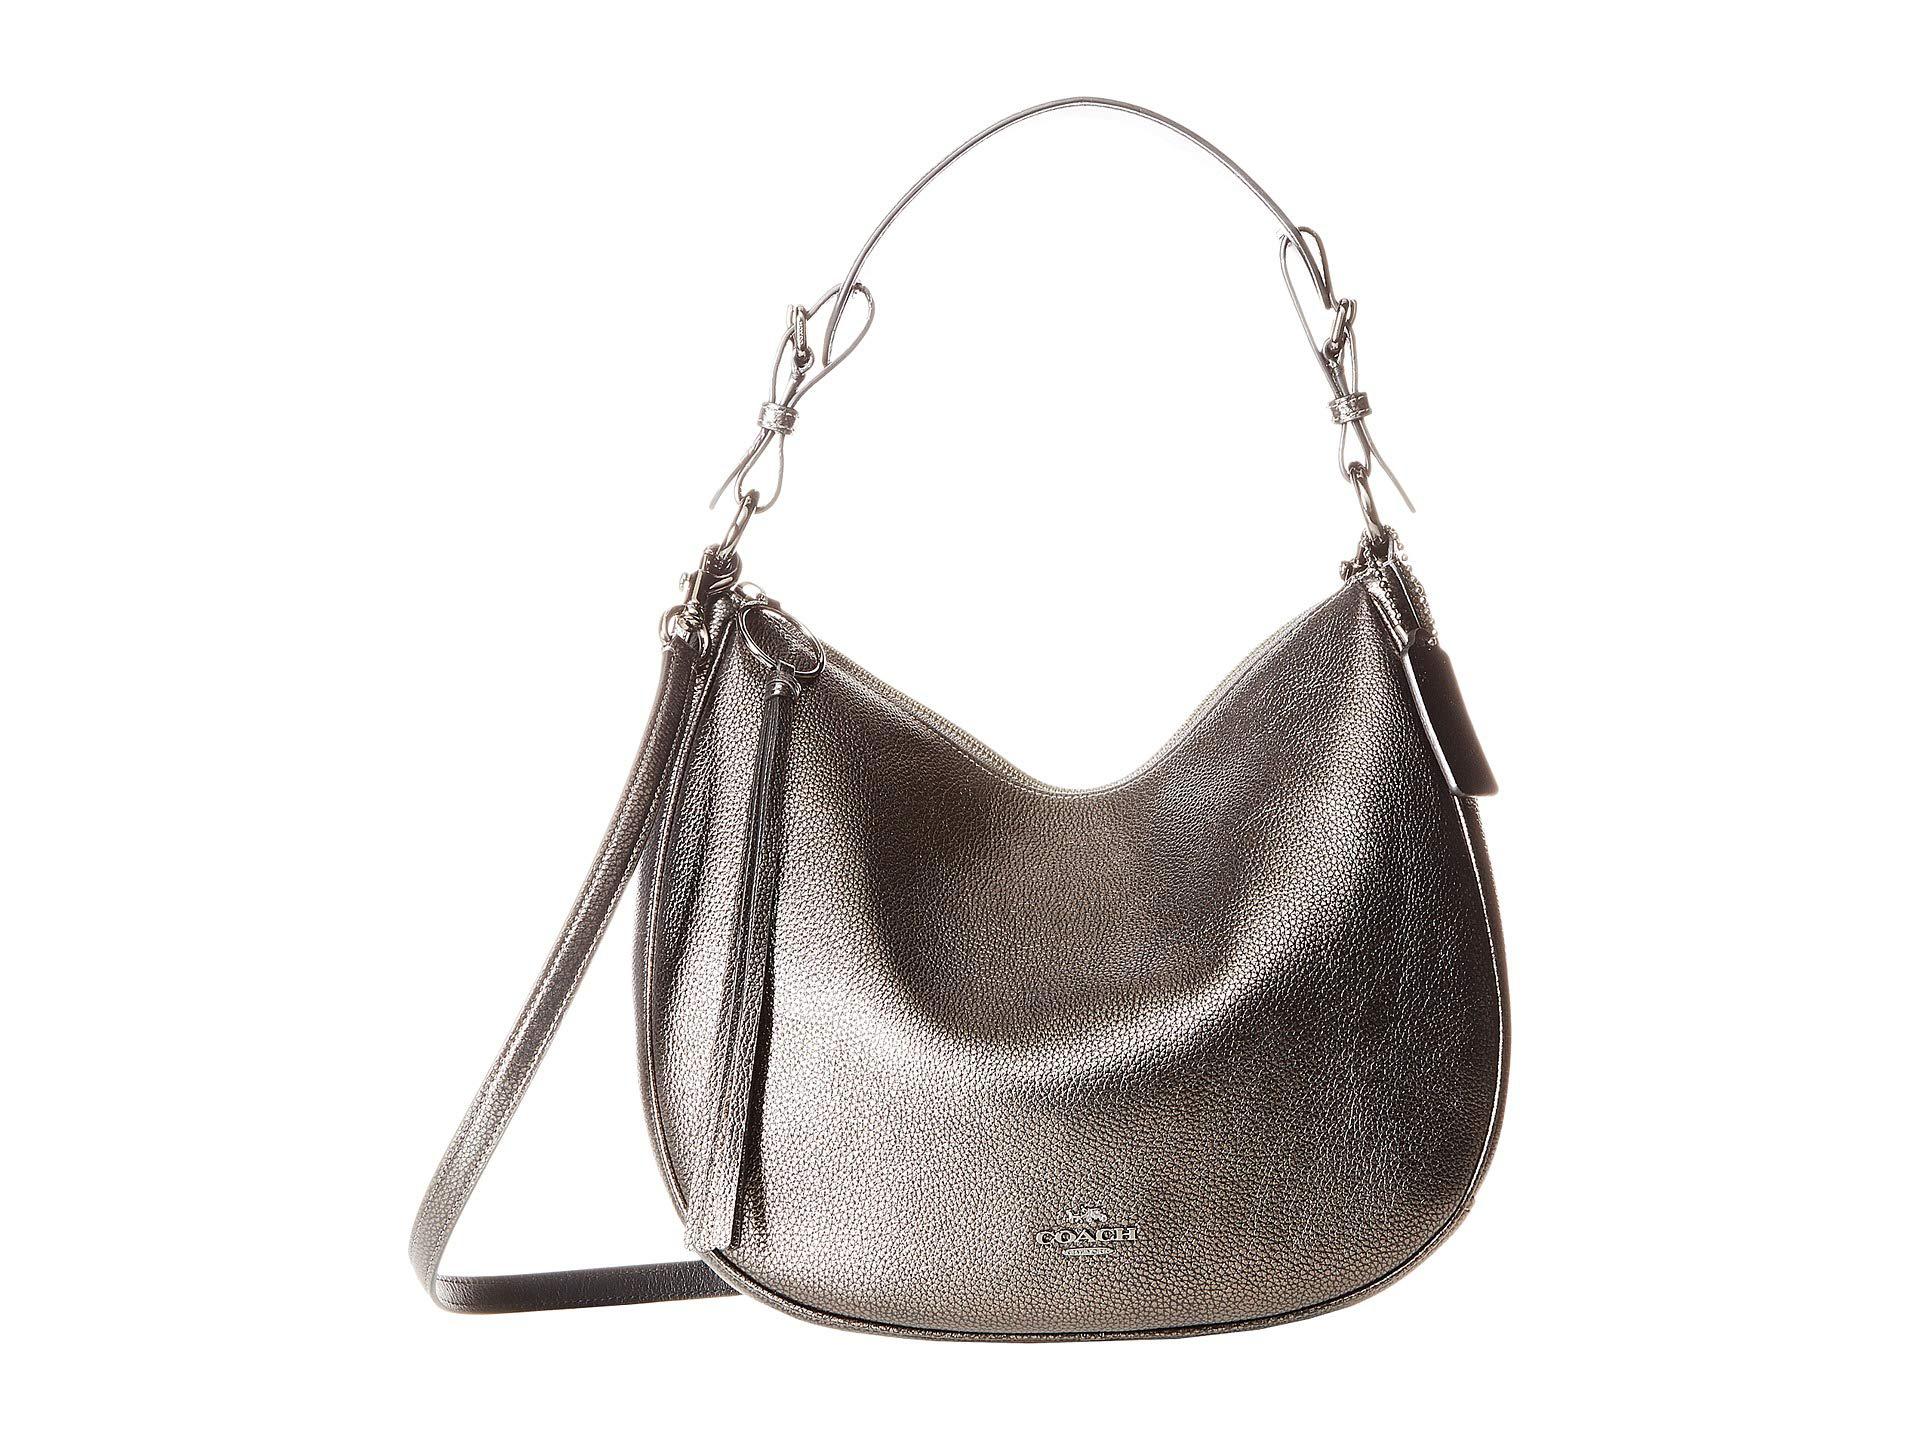 Stylish Coach Jules Hobo Bag in Colorblock Signature Canvas